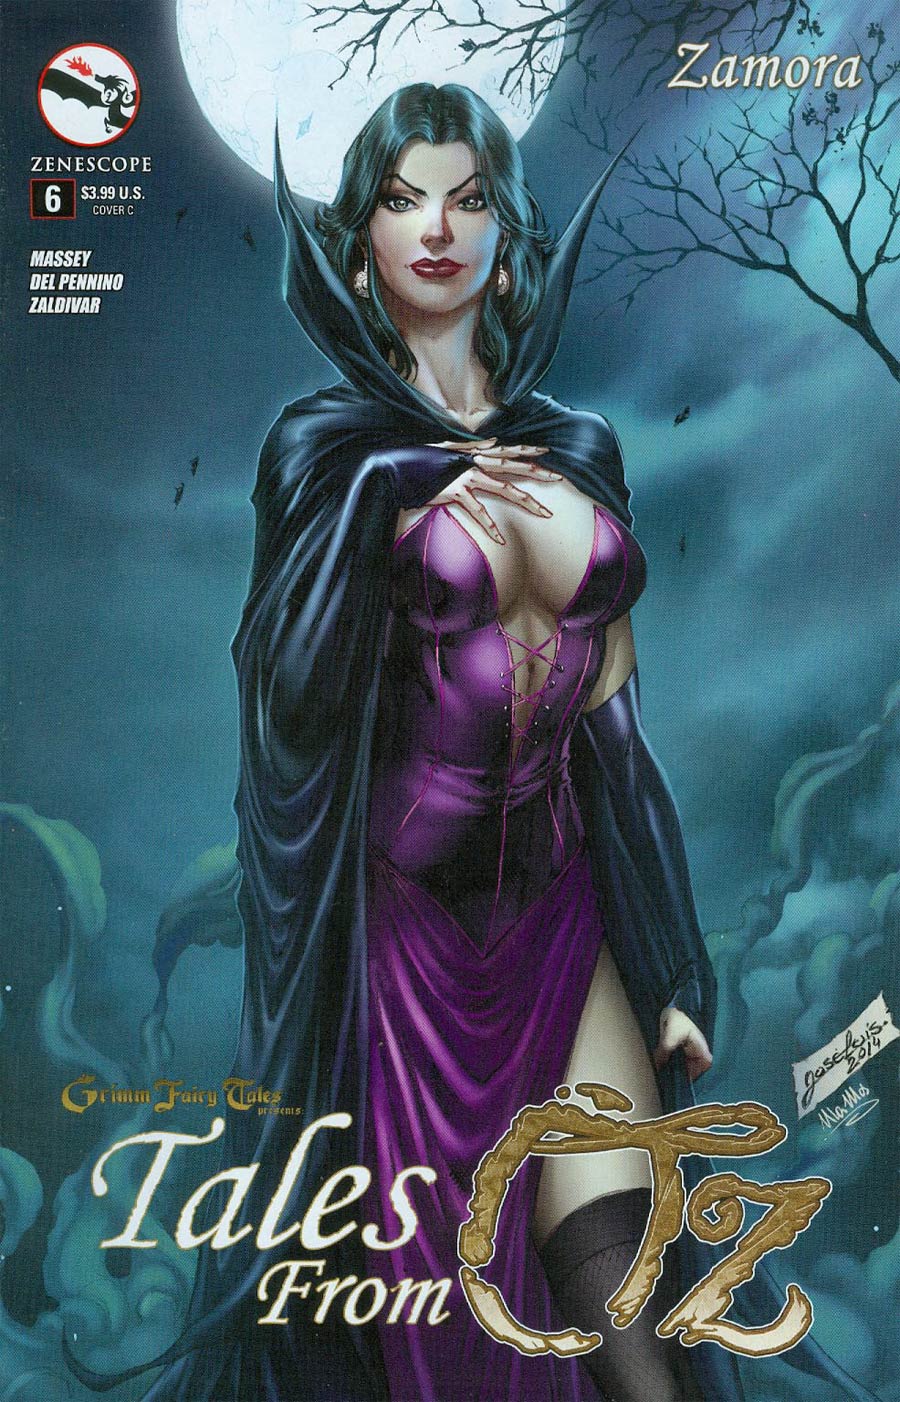 Grimm Fairy Tales Presents Tales From Oz #6 Zamora Cover C Jose Luis & Ula Mos